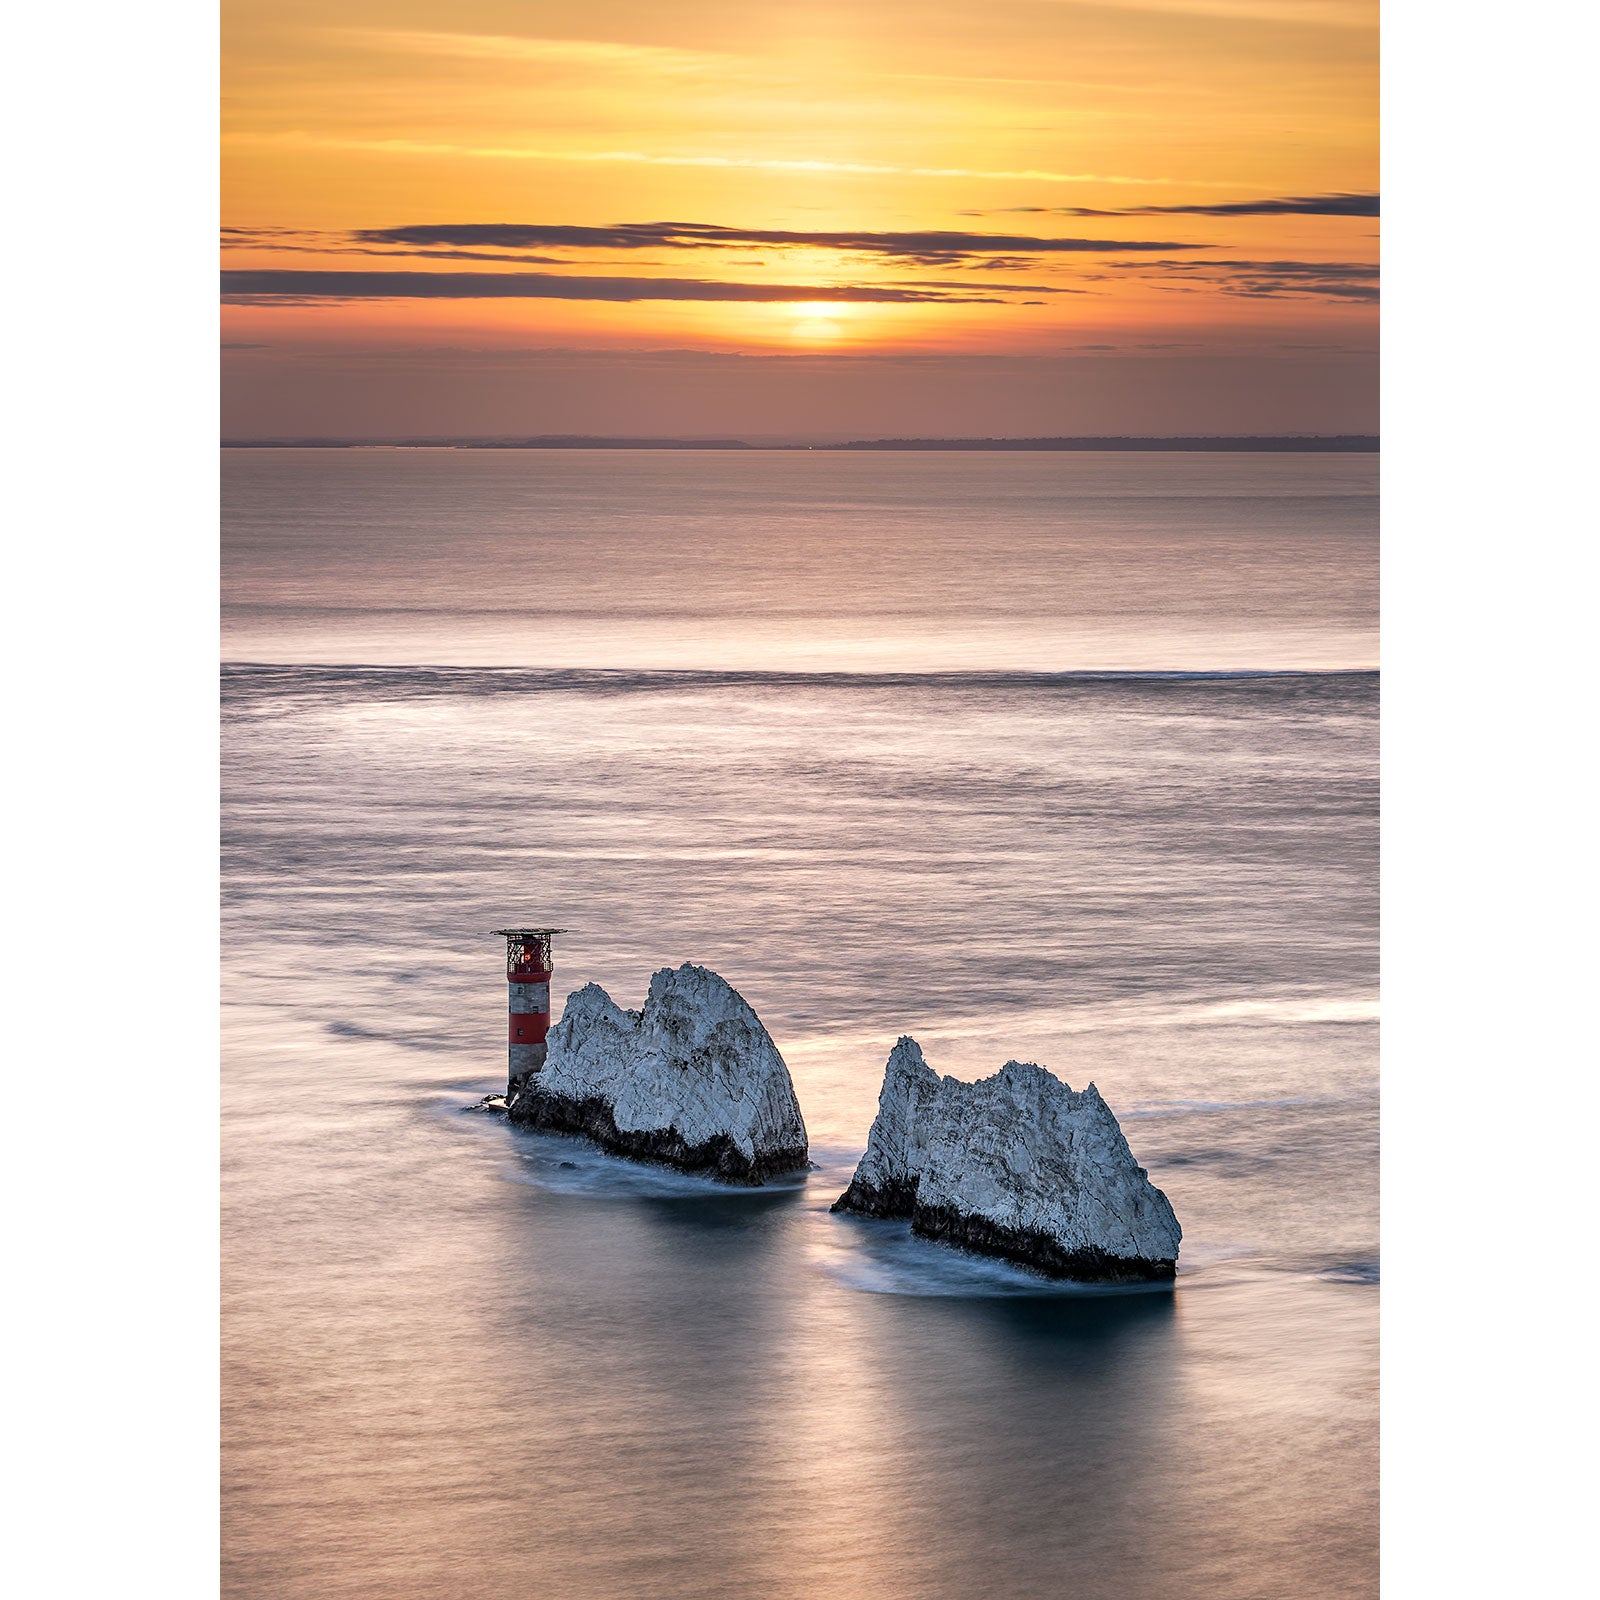 Sunset over the ocean with two rocky islets and a navigation beacon on The Needles by Available Light Photography.